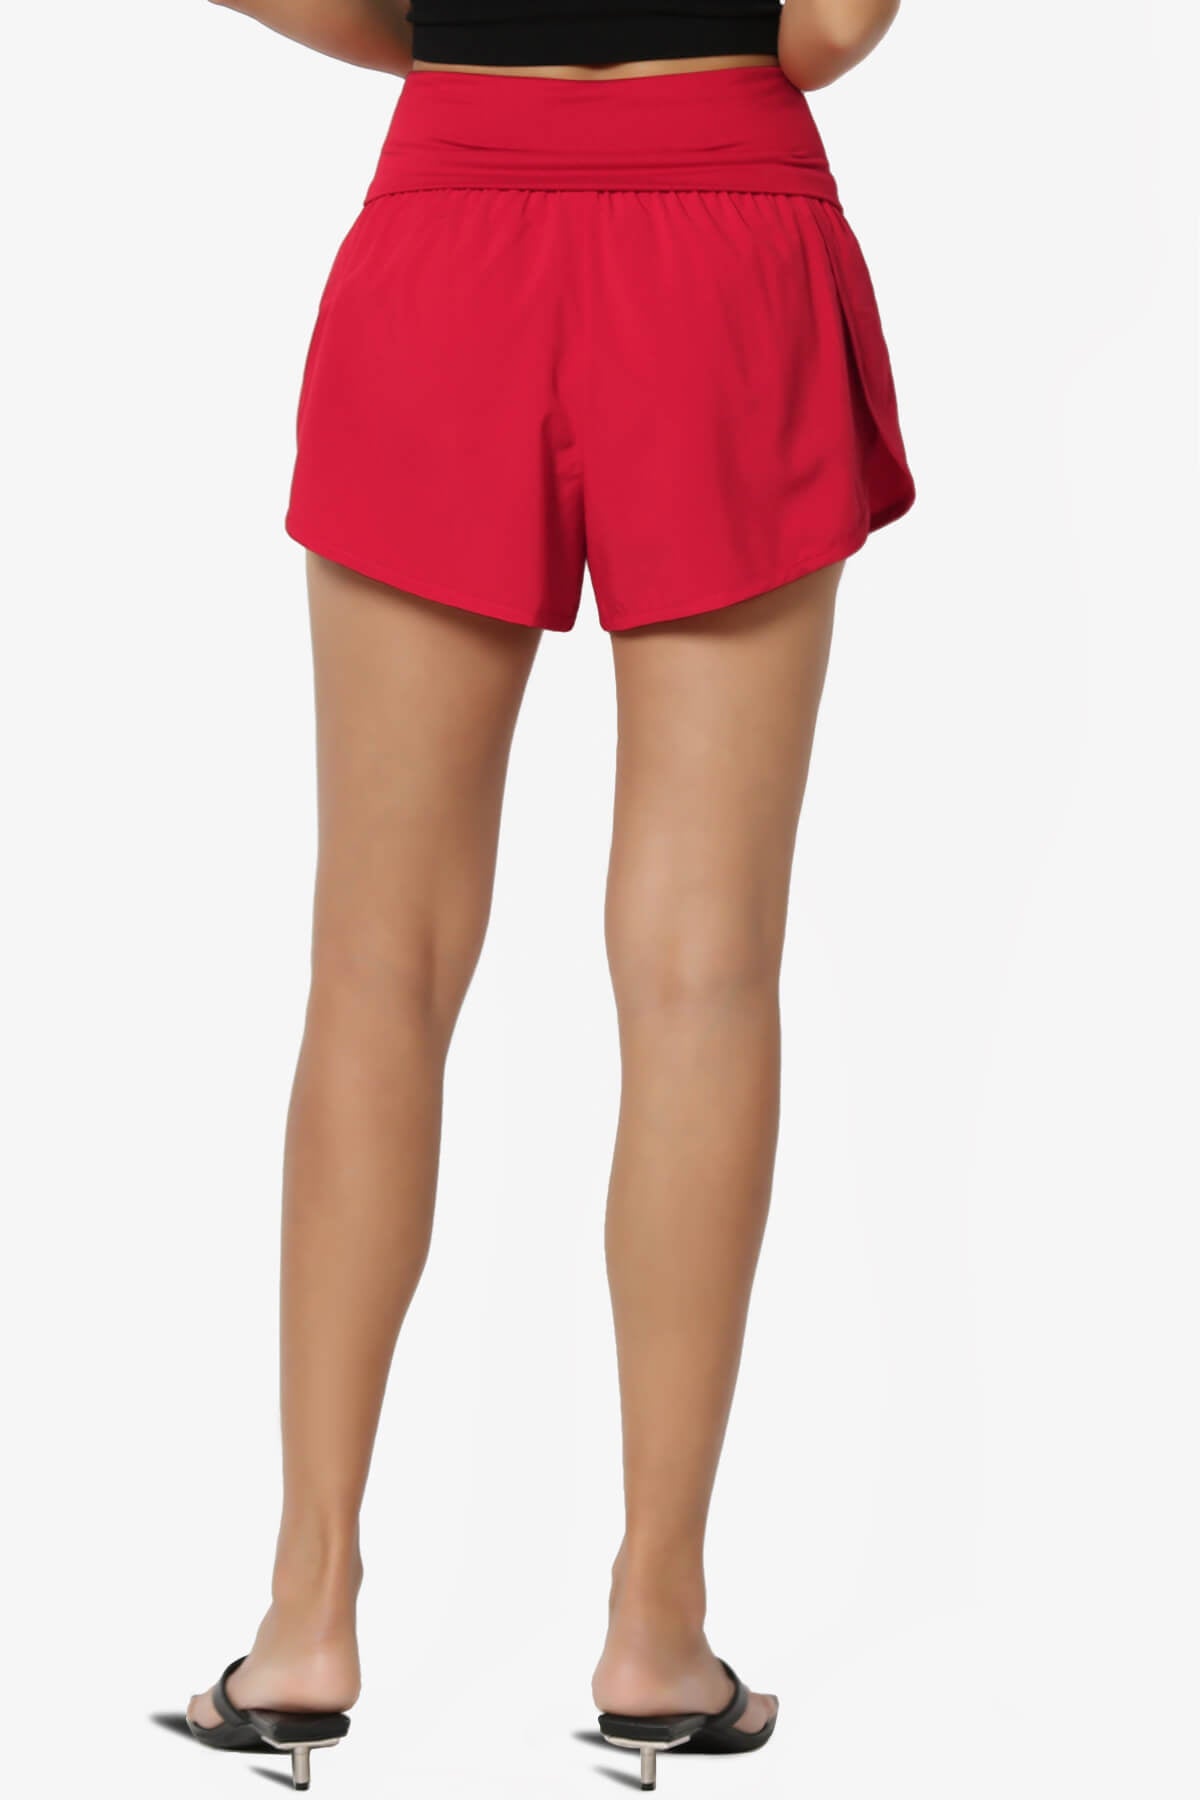 Game Time Foldover High Waist Running Shorts RED_2